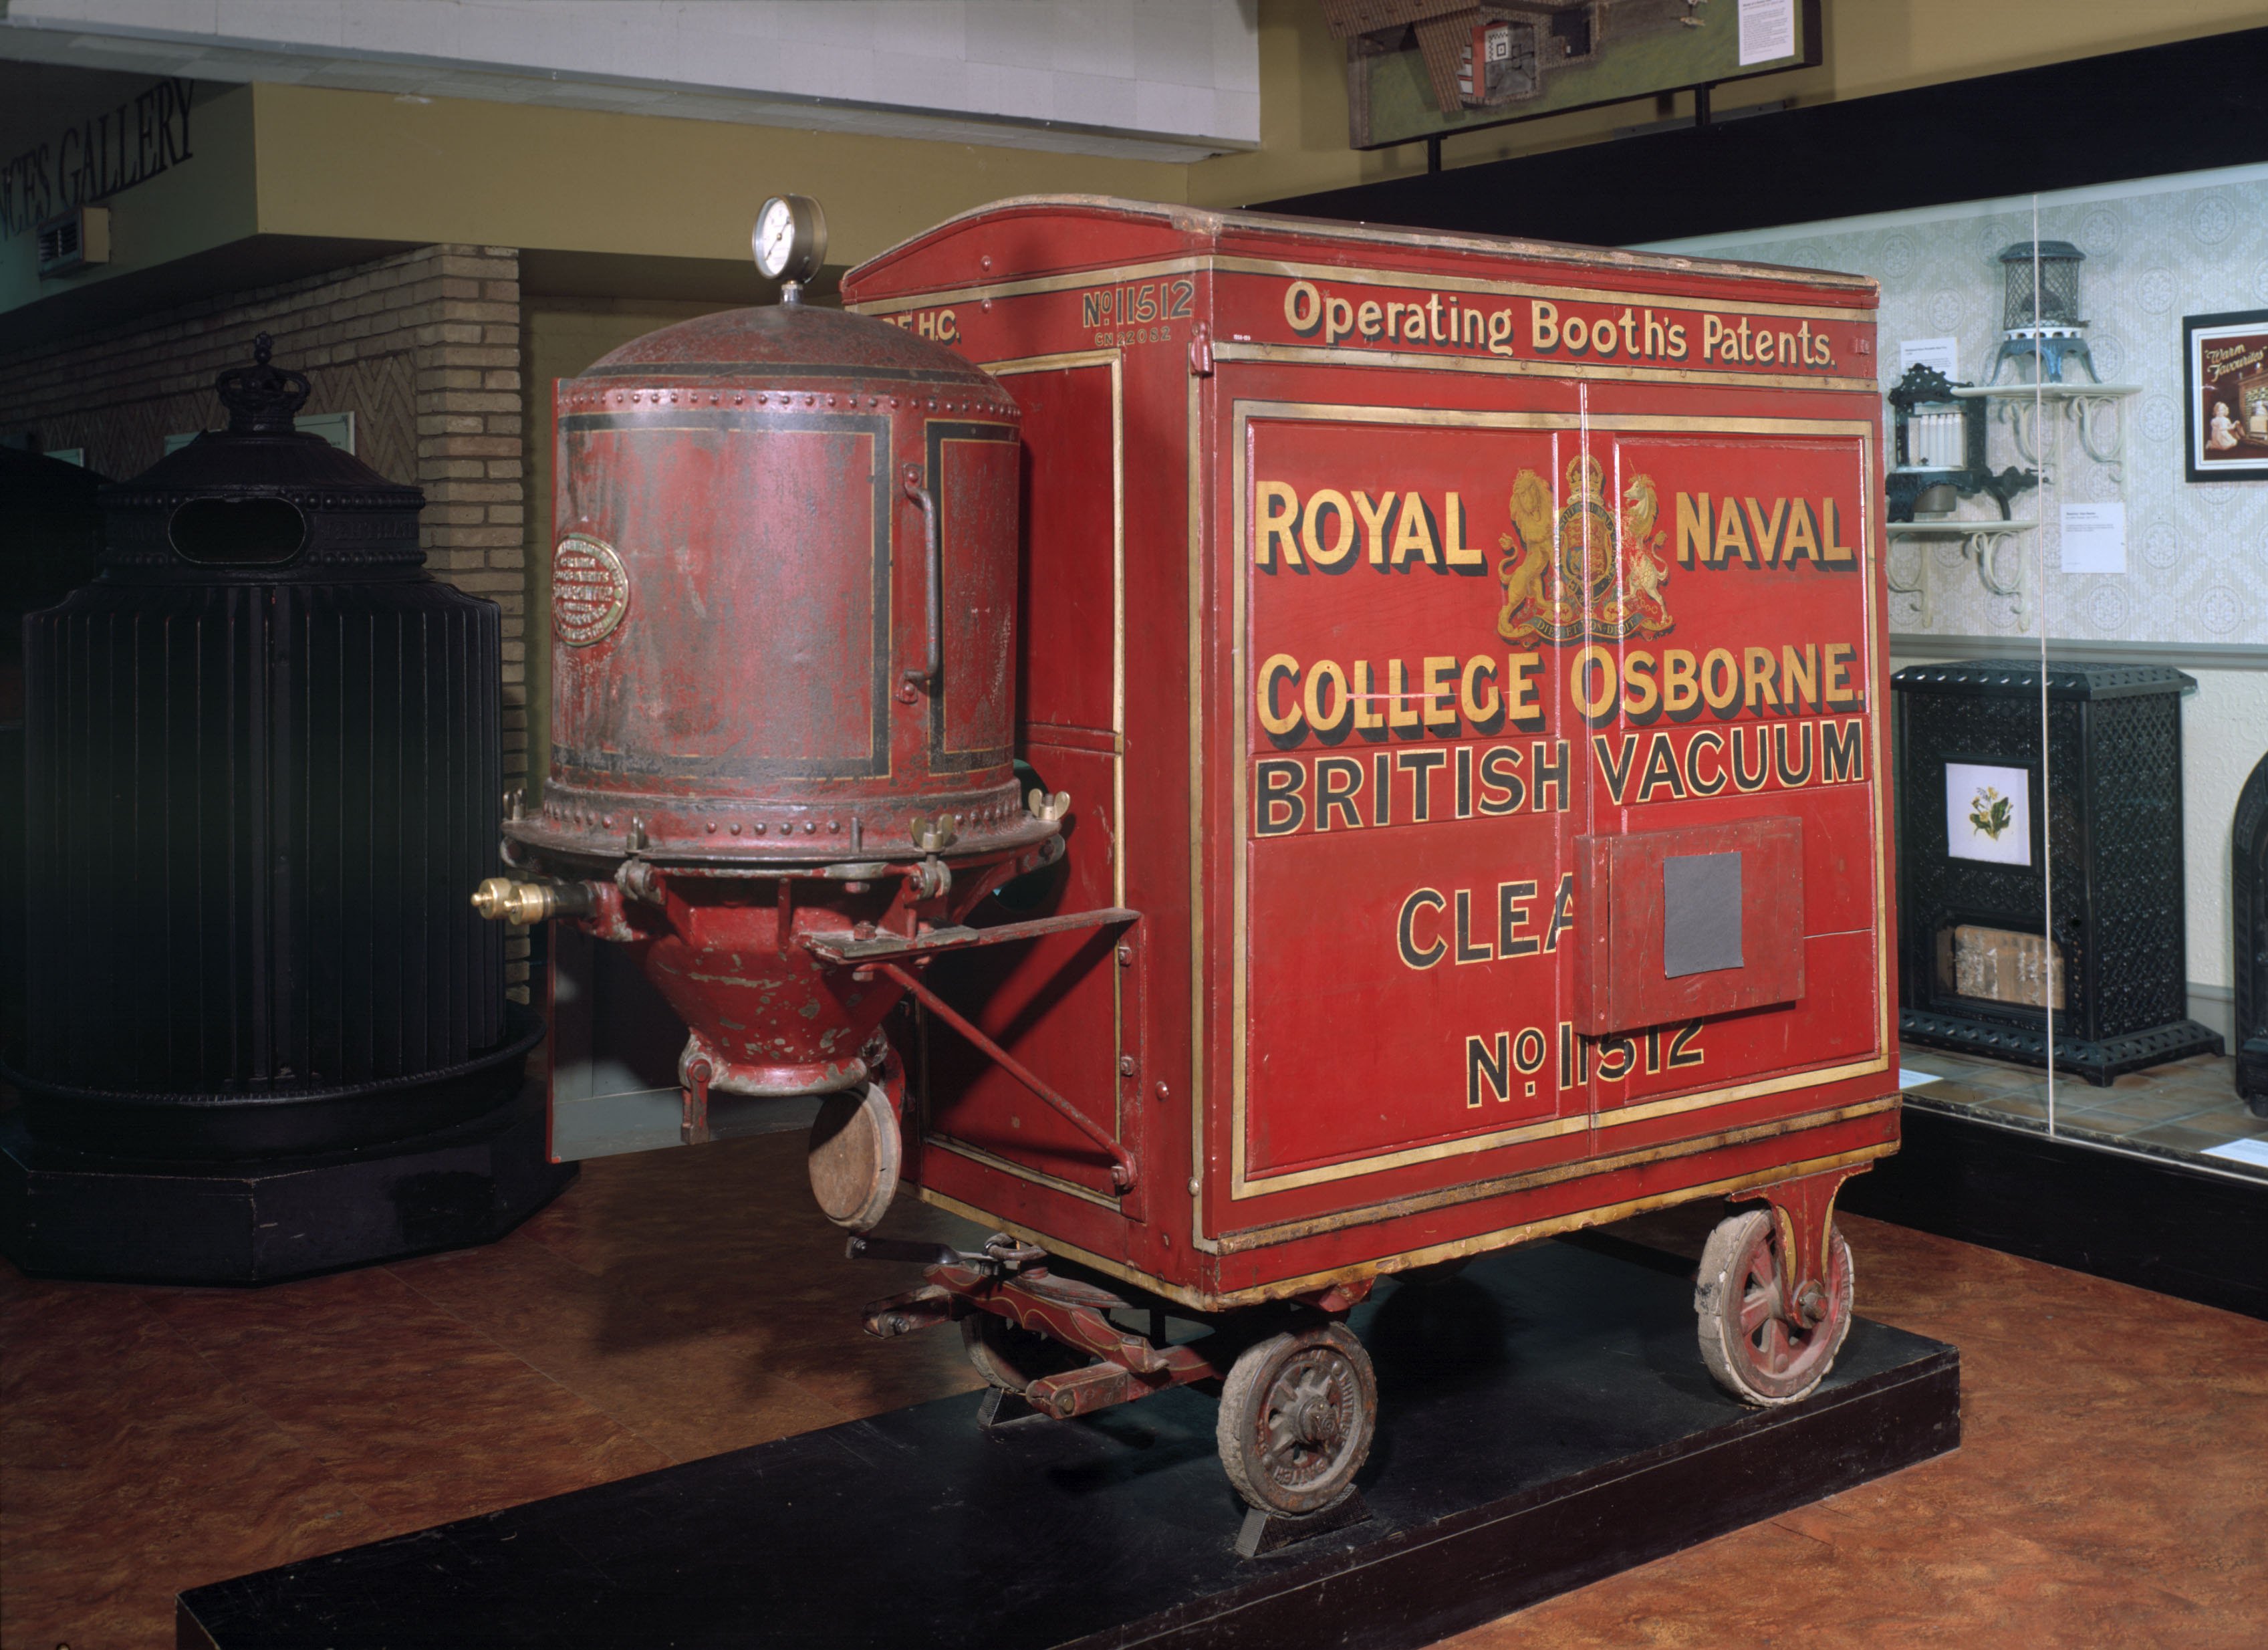 The invention of the vacuum cleaner is generally credited to Hubert Cecil Booth. He built his first machine in 1901 and this one is very similar. It was made for Osborne House, a training college for naval officers on the Isle of Wight. (Science &amp; Society Picture Library/Getty Images)